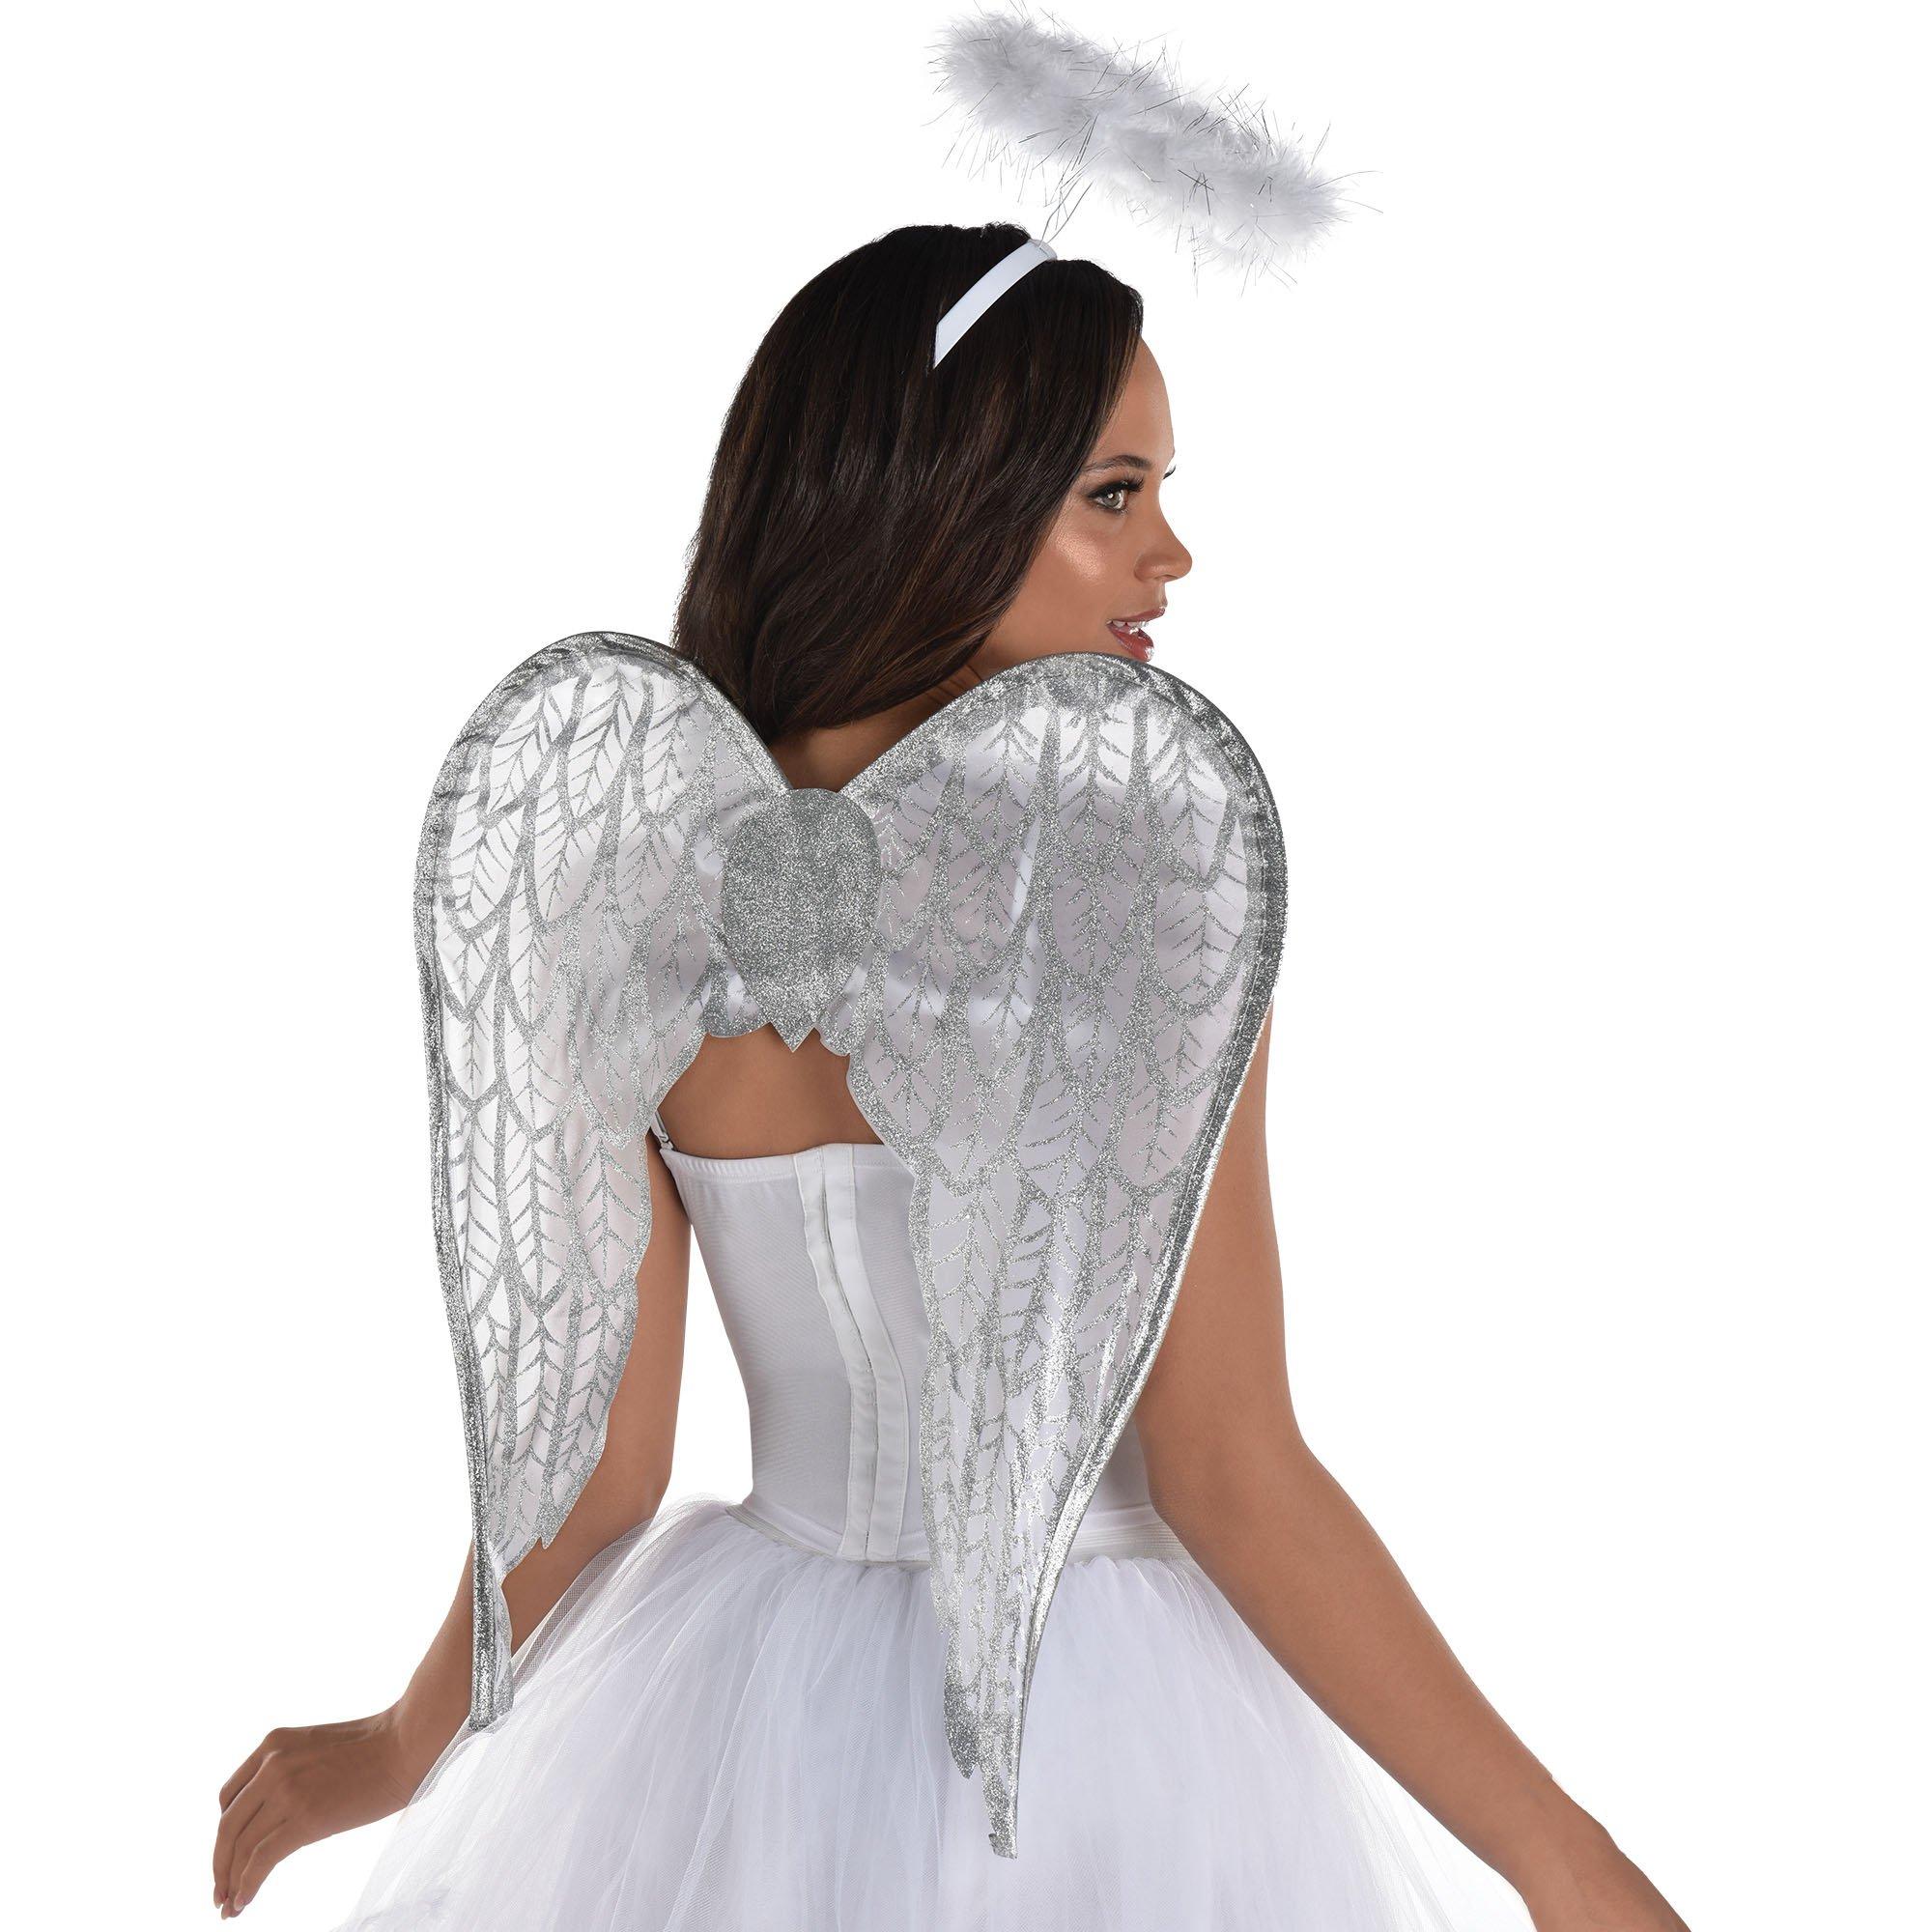 Glitter White Angel Costume Accessory Kit | Party